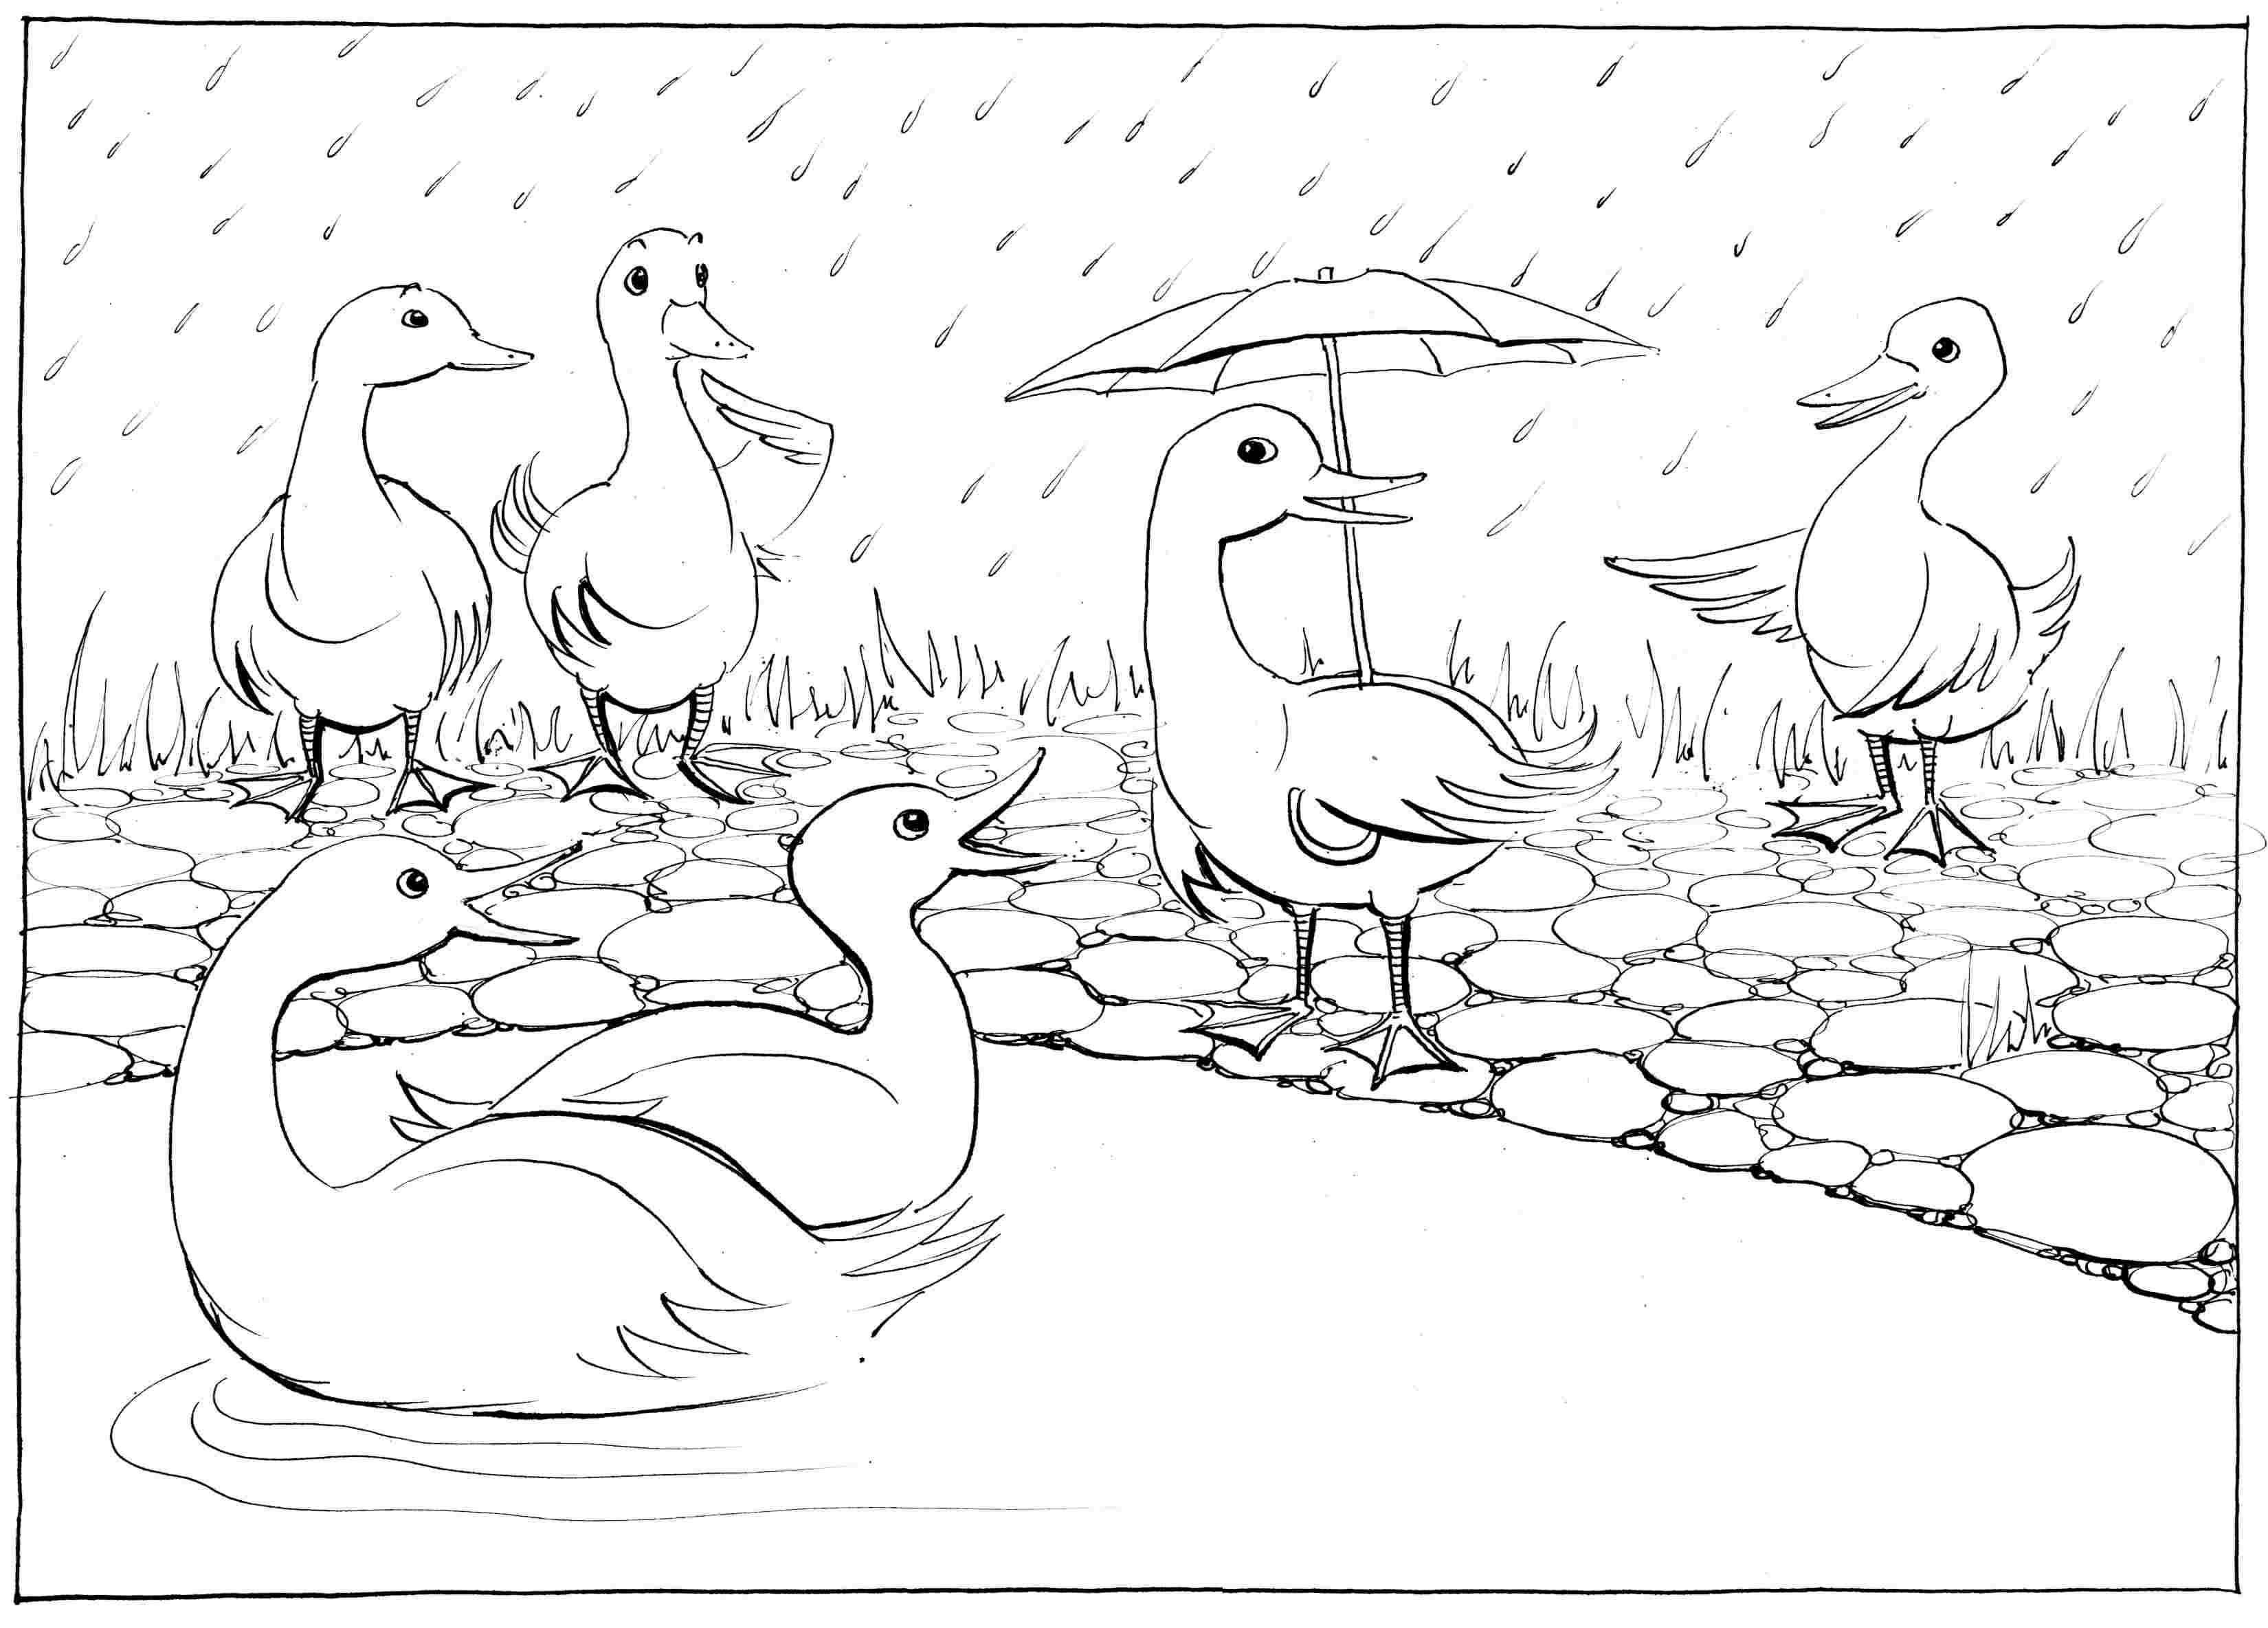 Water-Shy - colouring-in drawing - to download, right click and save, print out and colour in!